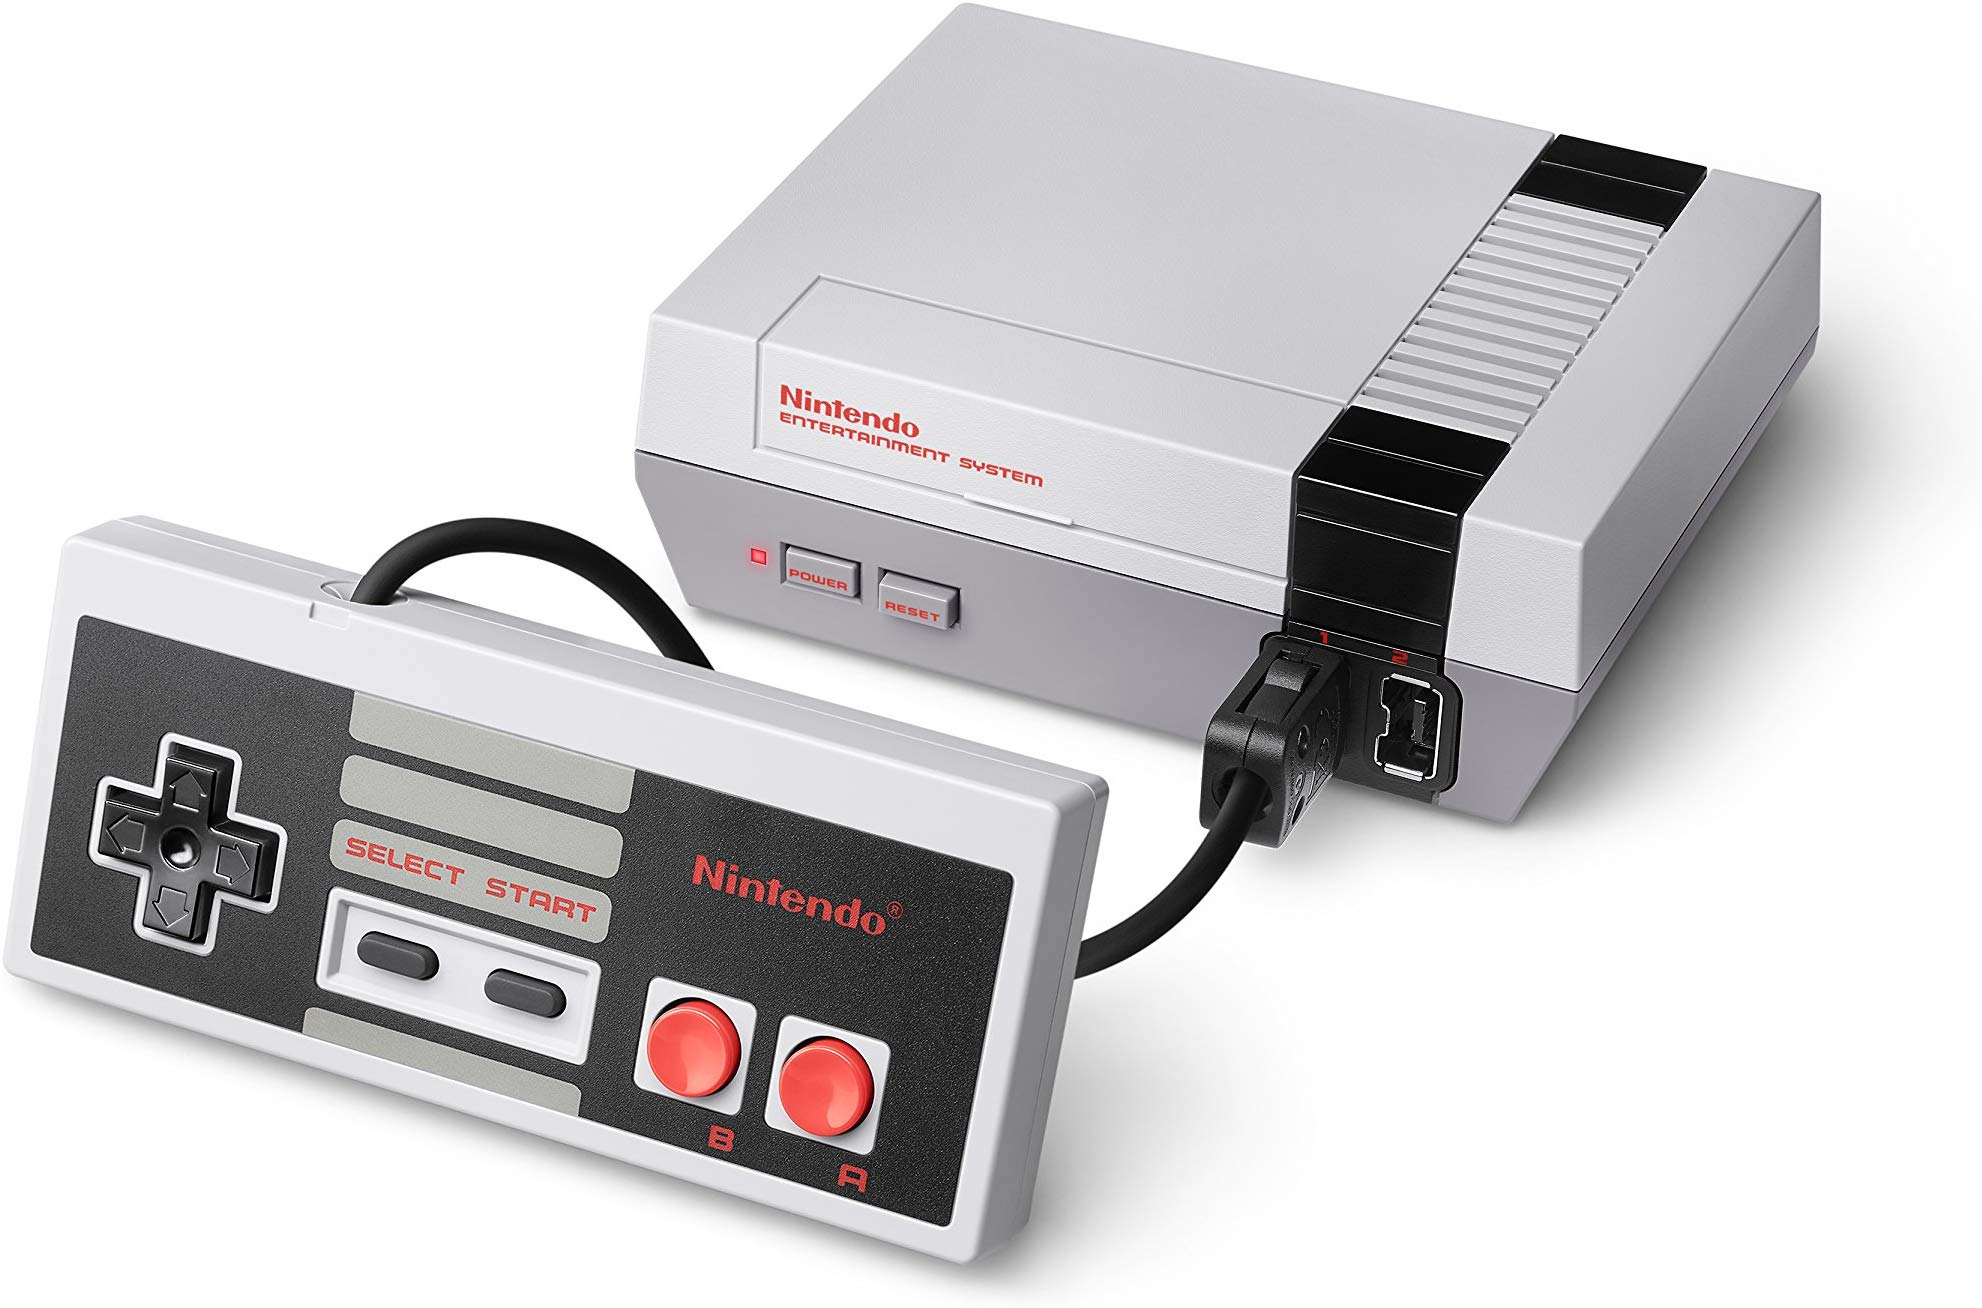 Your PC isn't powerful enough for this NES emulator